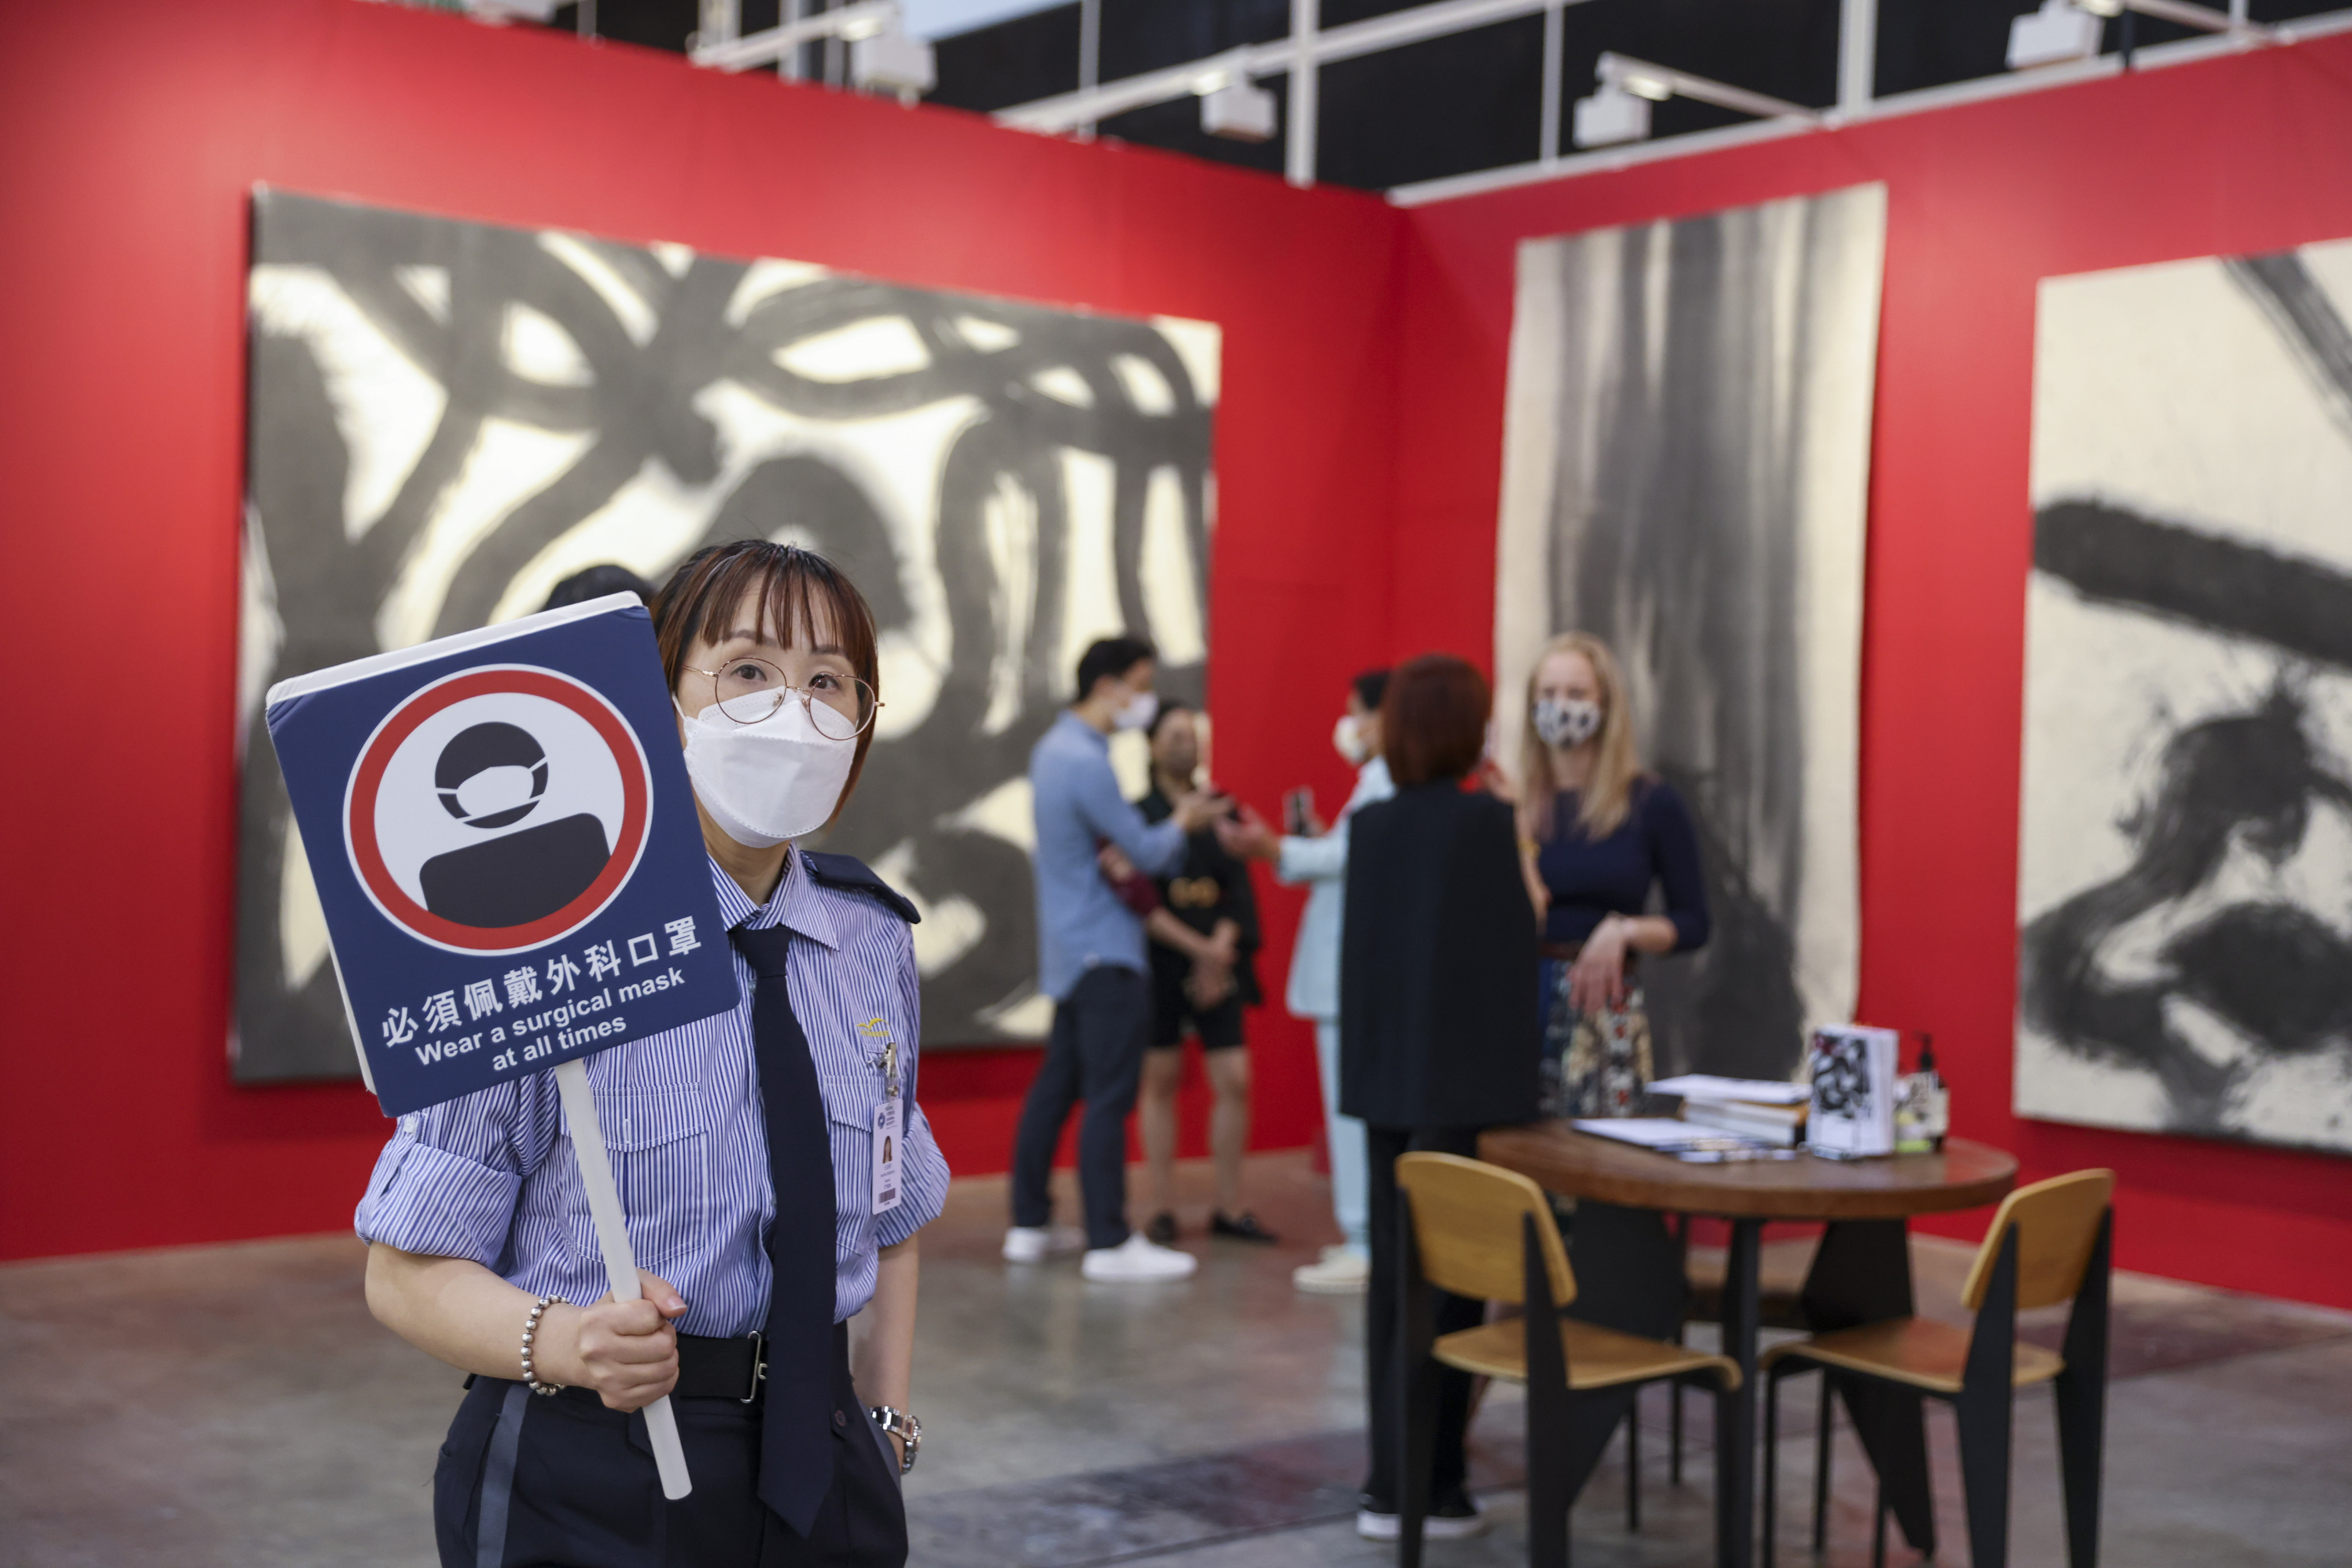 A security guard reminds visitors to wear face masks at all times in the Leo Gallery during a private viewing of Art Basel Hong Kong, held at the Hong Kong Convention and Exhibition Centre in Wan Chai on May 25. Photo: Nora Tam